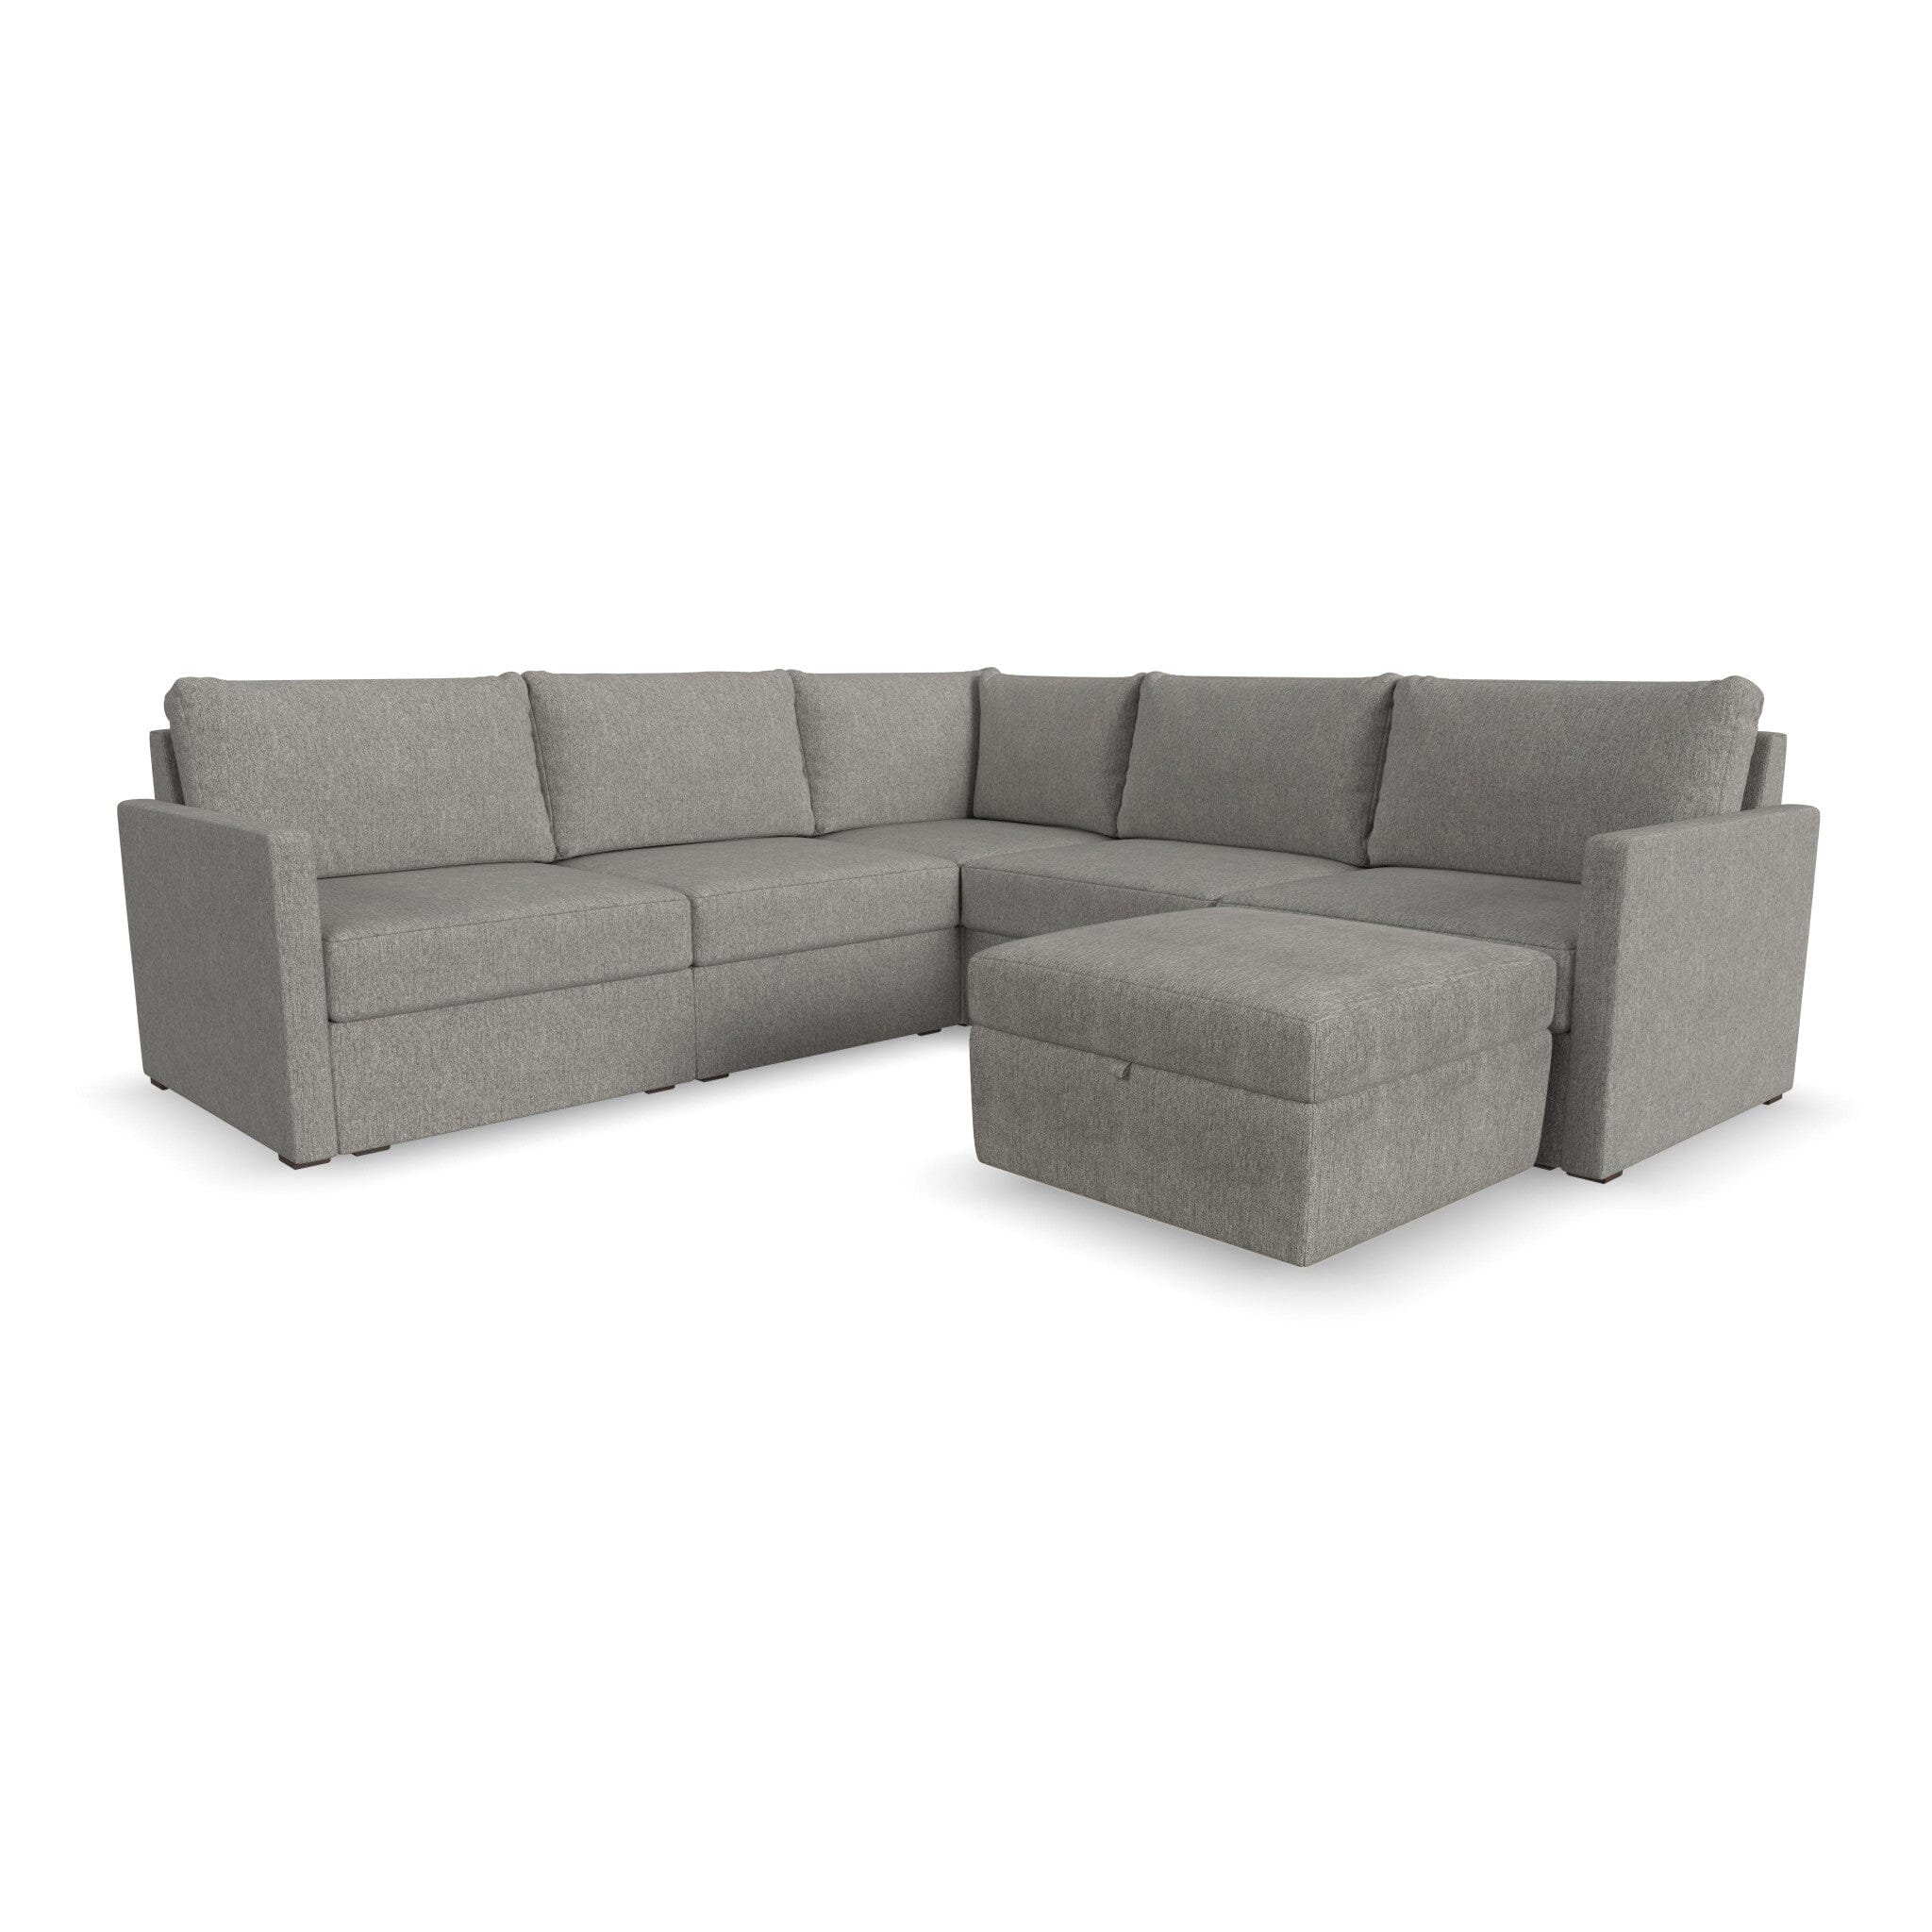 Traditional 5-Seat Sectional with Narrow Arm and Storage Ottoman By Flex Sectional Flex